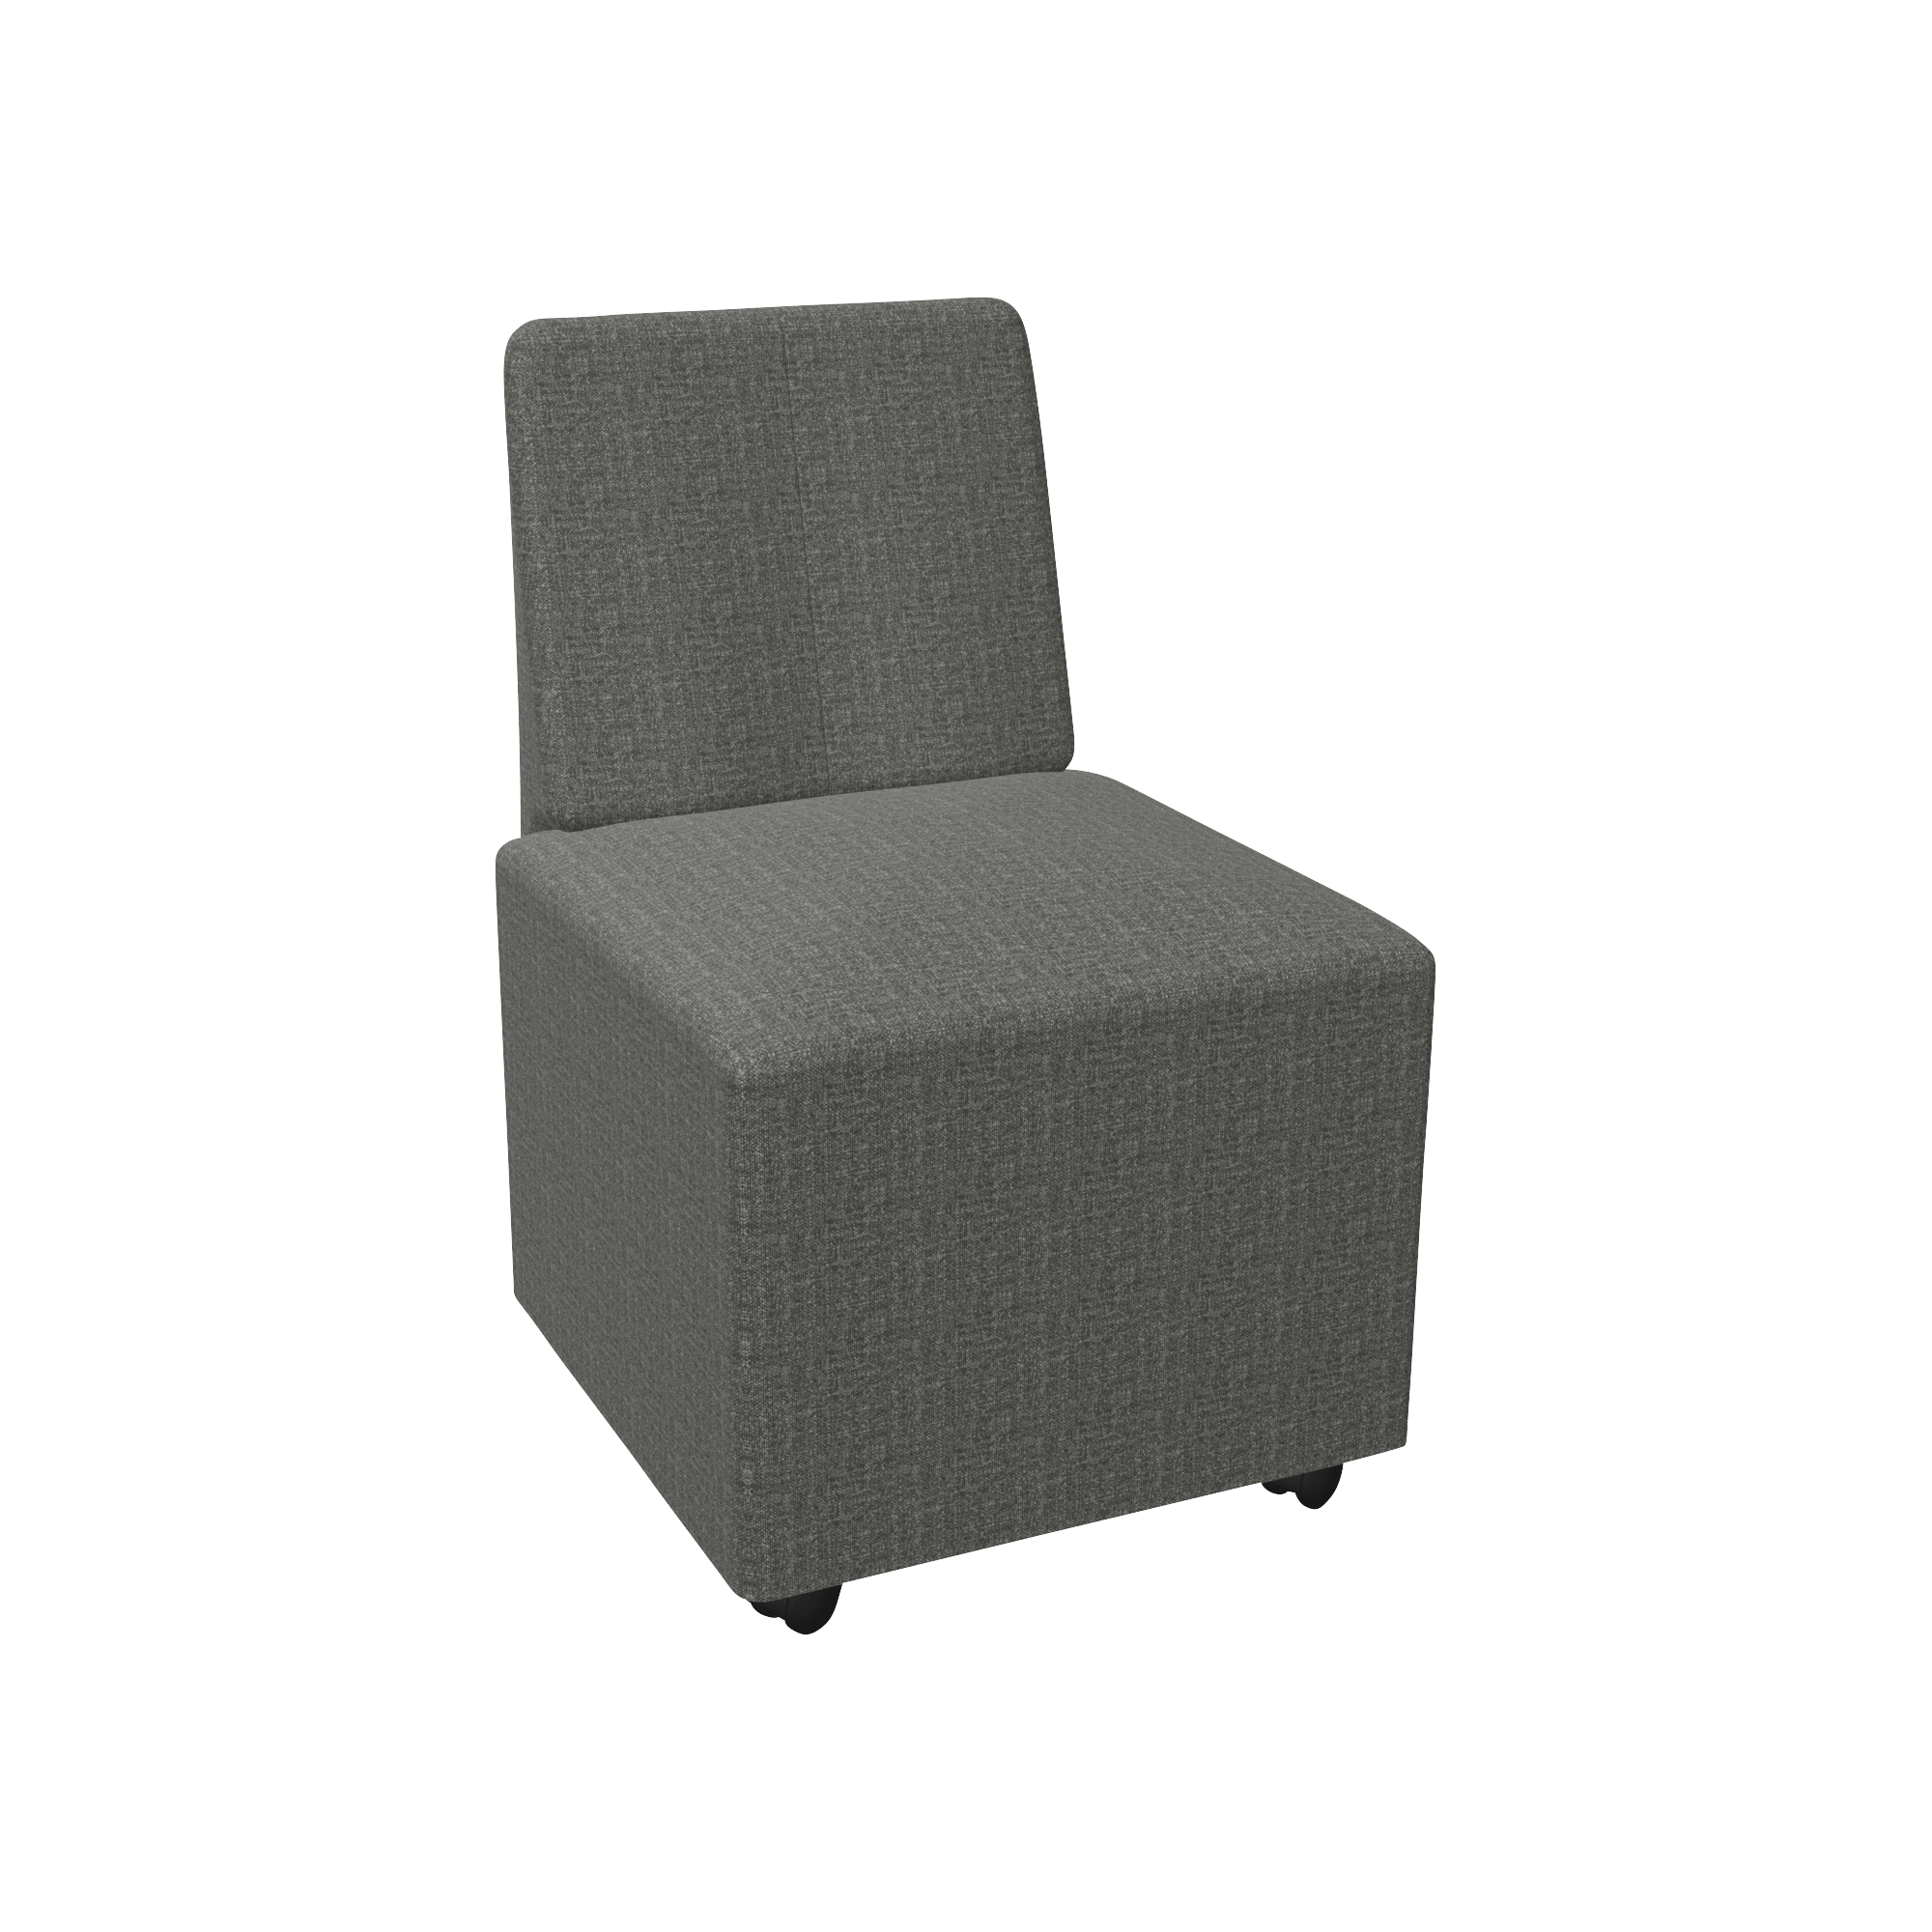 upholstered cubed chair with back rest and wheels